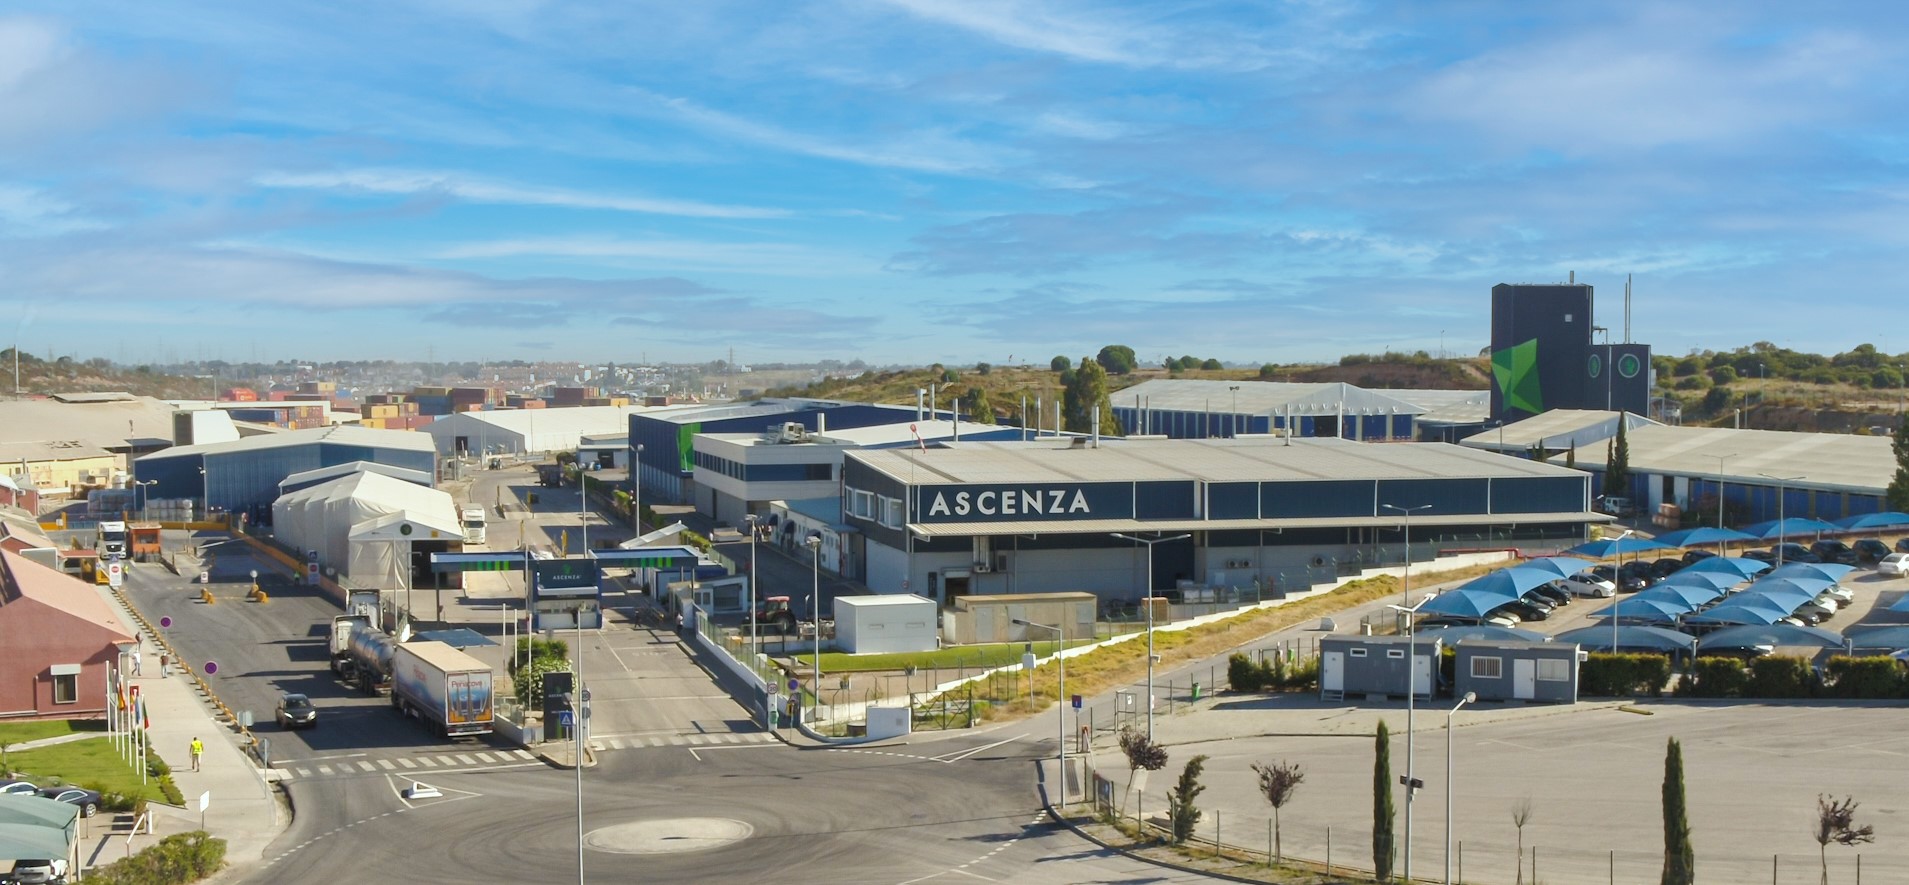 wide Photo of ASCENZA plant in Setúbal, Portugal, showing the entire facilities